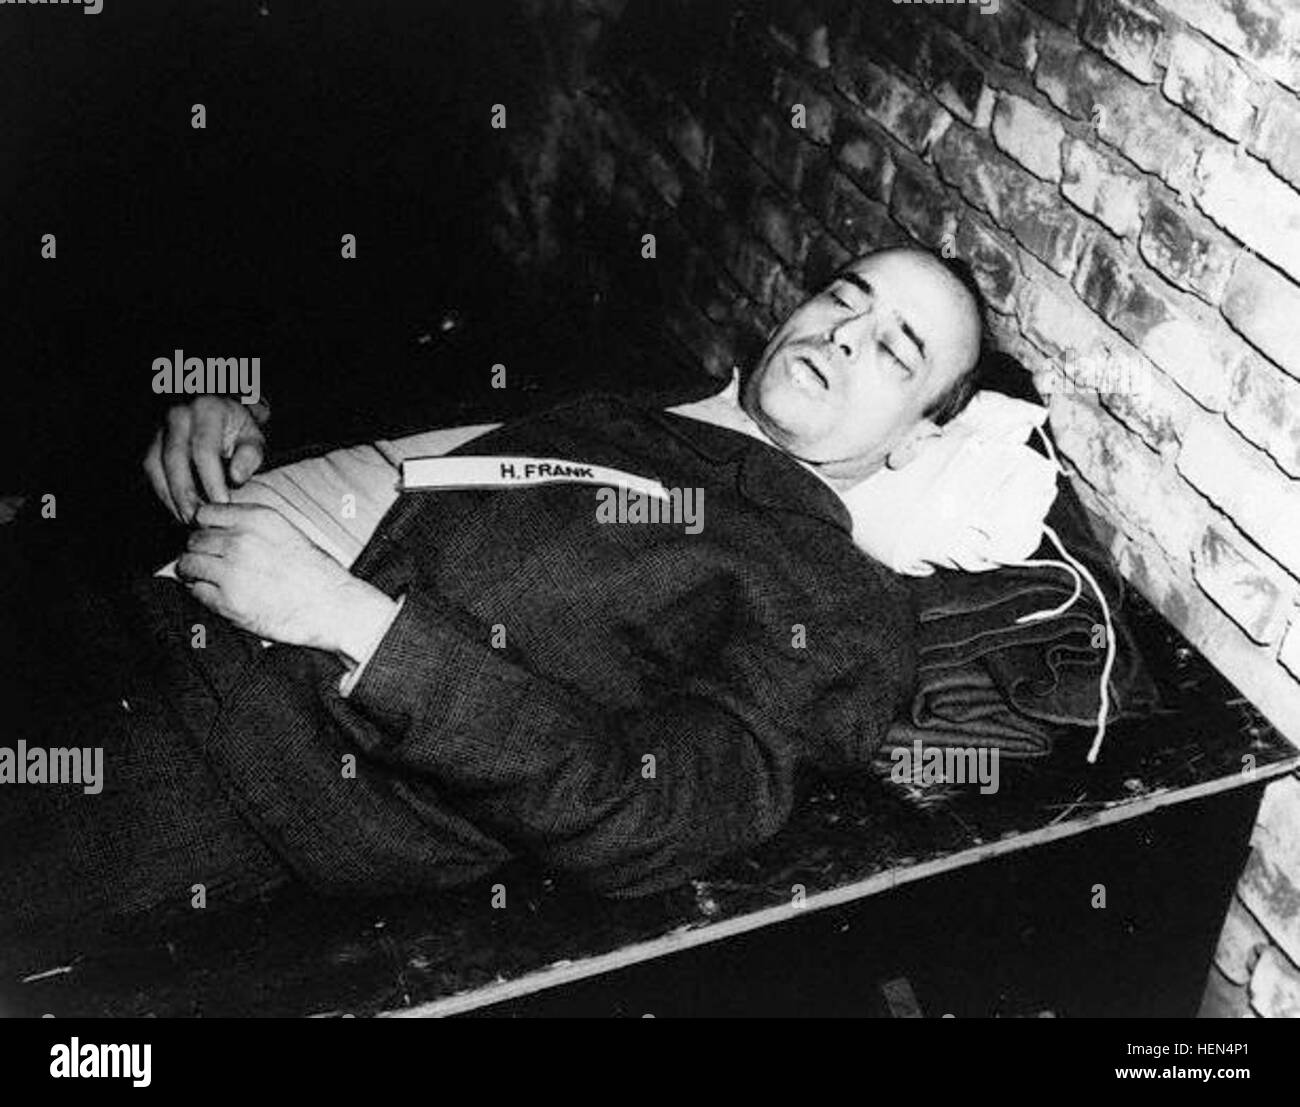 October 1946, Nuremberg, Germany --- The corpse of Nazi war criminal Hans Frank after his execution by hanging. Frank, the governor of Poland after its invasion in 1939, was judged guilty of war crimes and crimes against humanity in the Nuremburg trials. October 1946. --- Image by © CORBIS Dead hansfrank Stock Photo